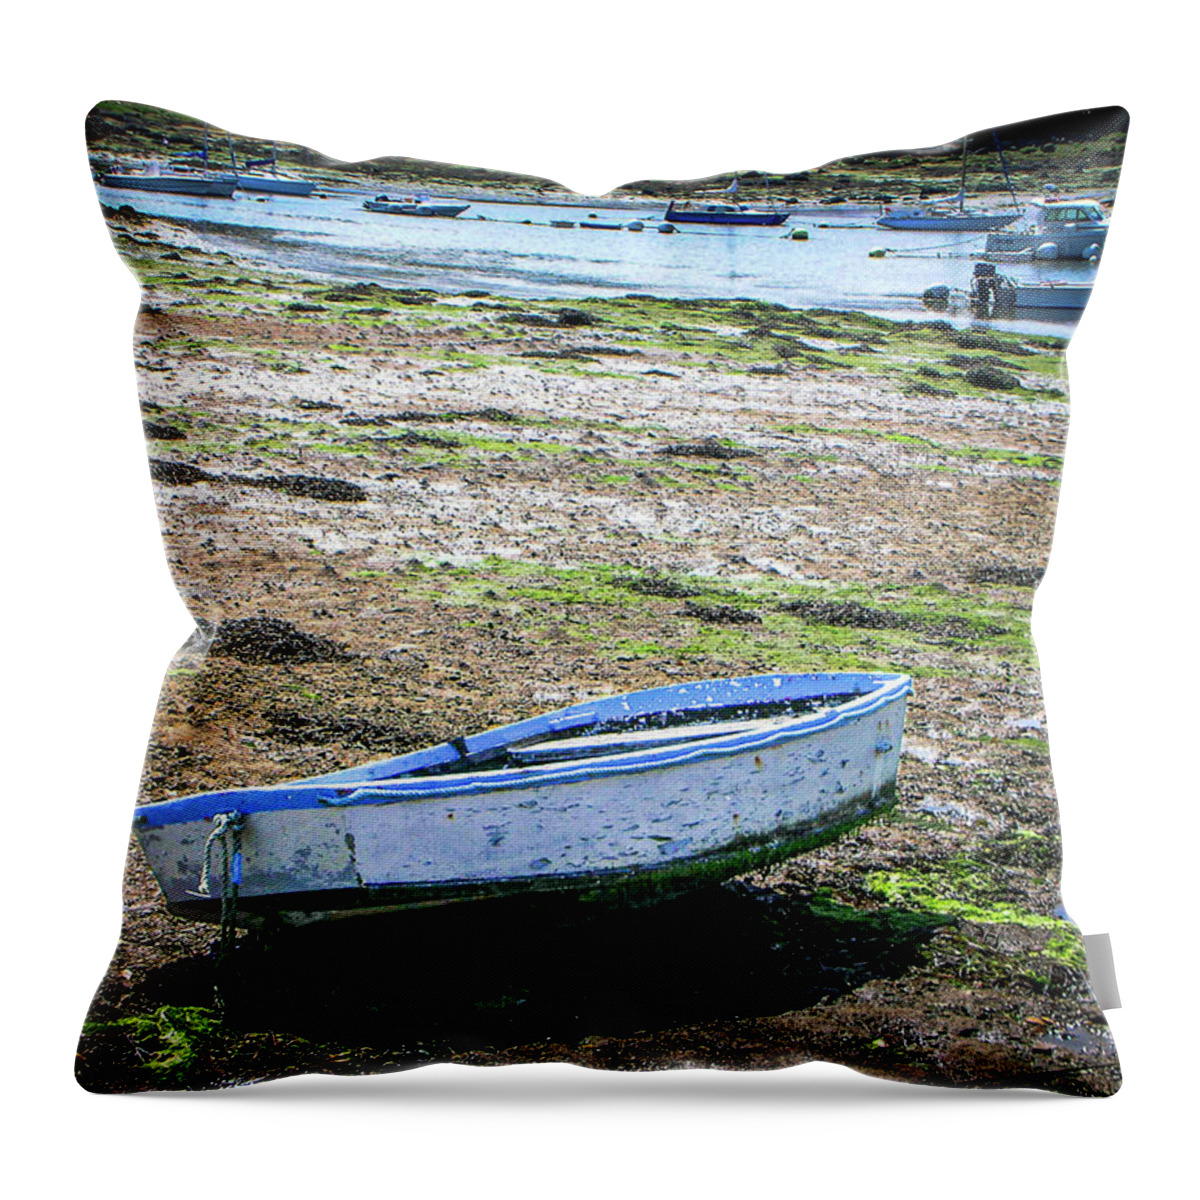 Water Throw Pillow featuring the photograph A-ground by Jim Feldman